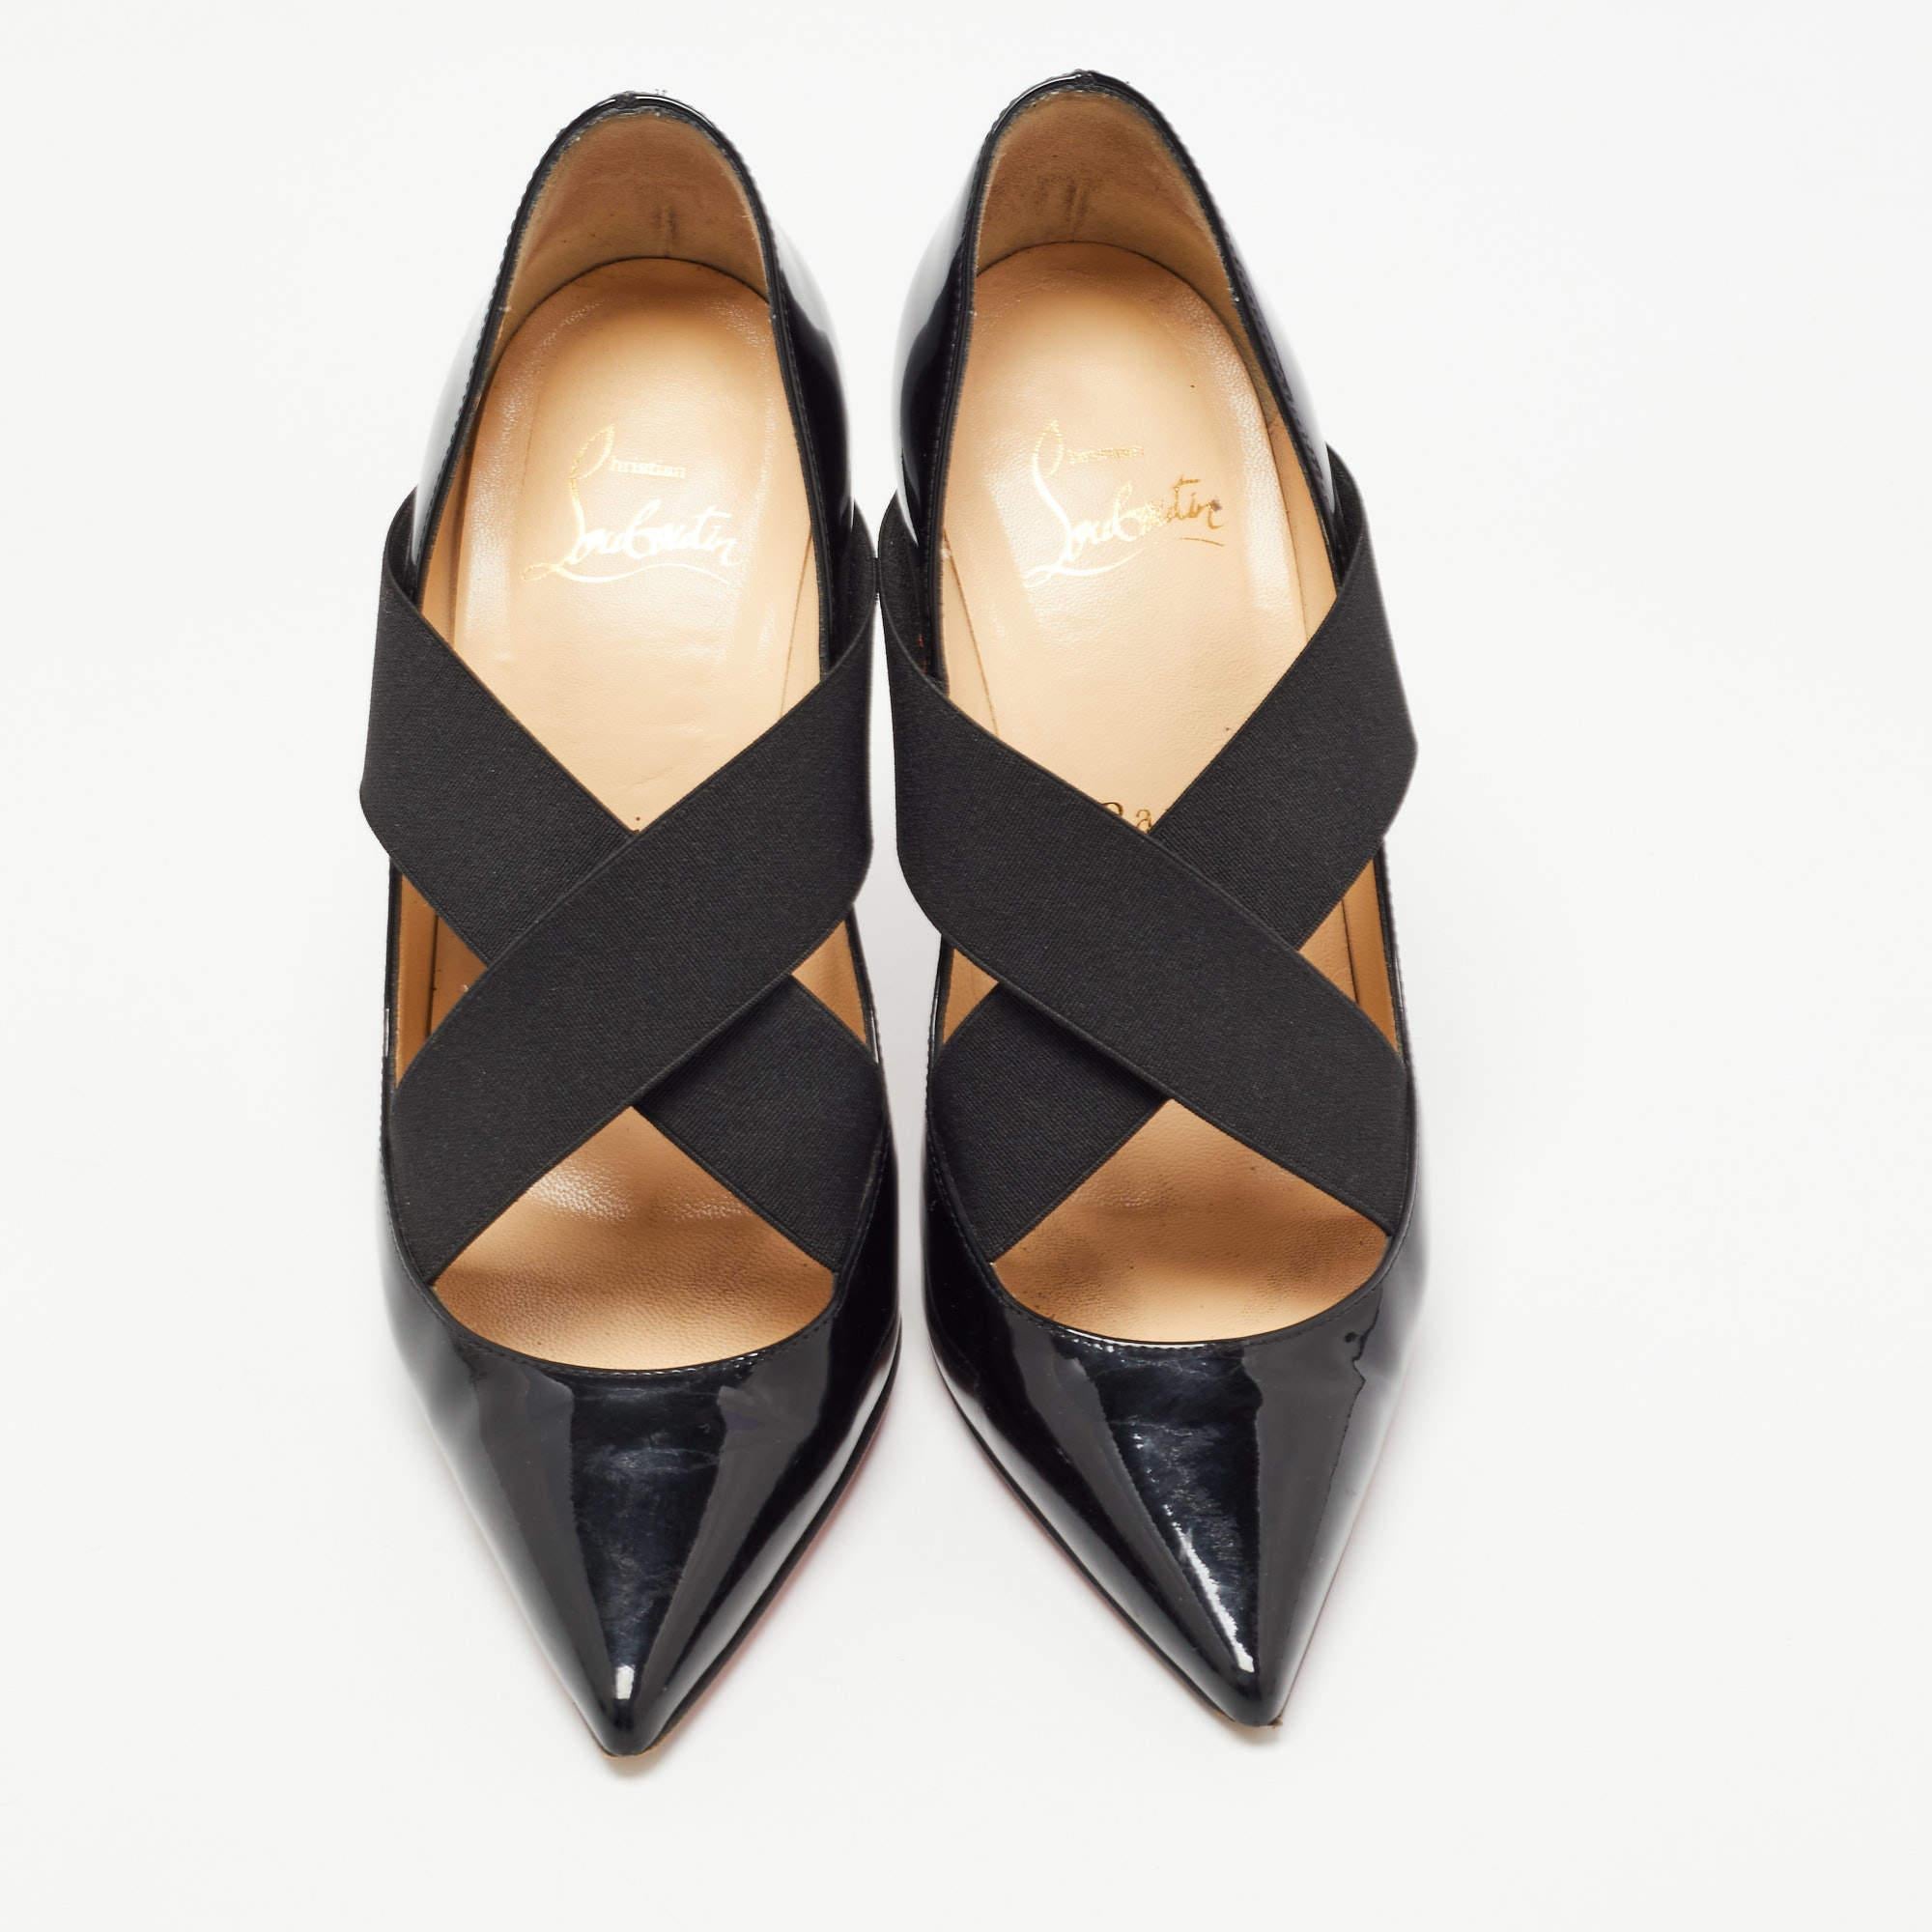 Wonderfully-crafted shoes added with notable elements to fit well and pair perfectly with all your plans. Make these designer pumps yours today!

Includes
Extra Heel Tips, Original Dustbag, Brand Box